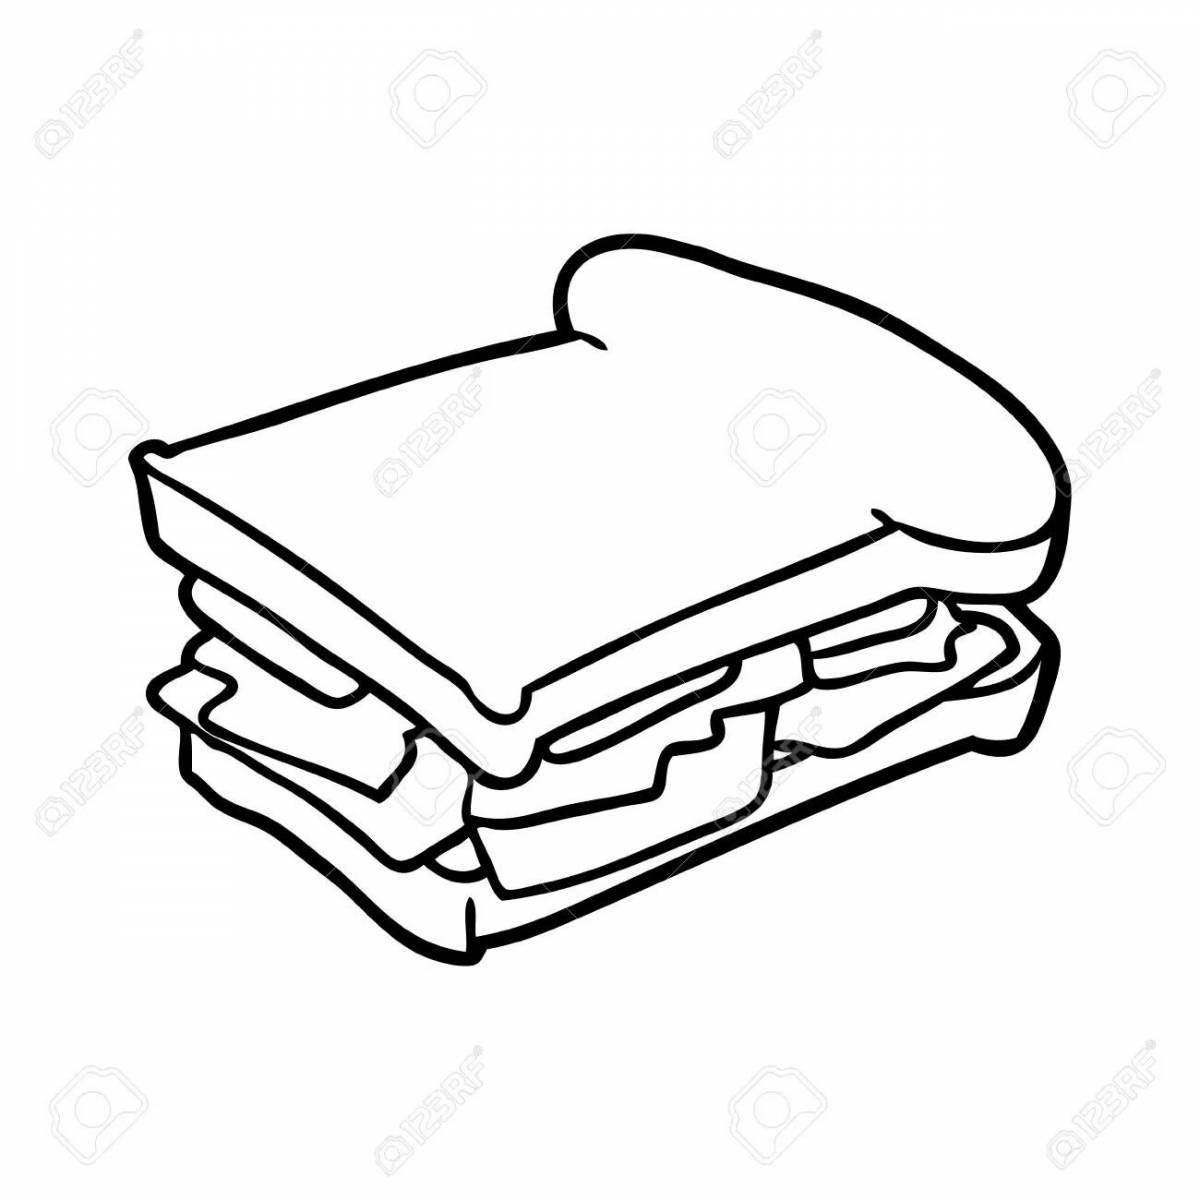 Cute sandwich coloring book for kids